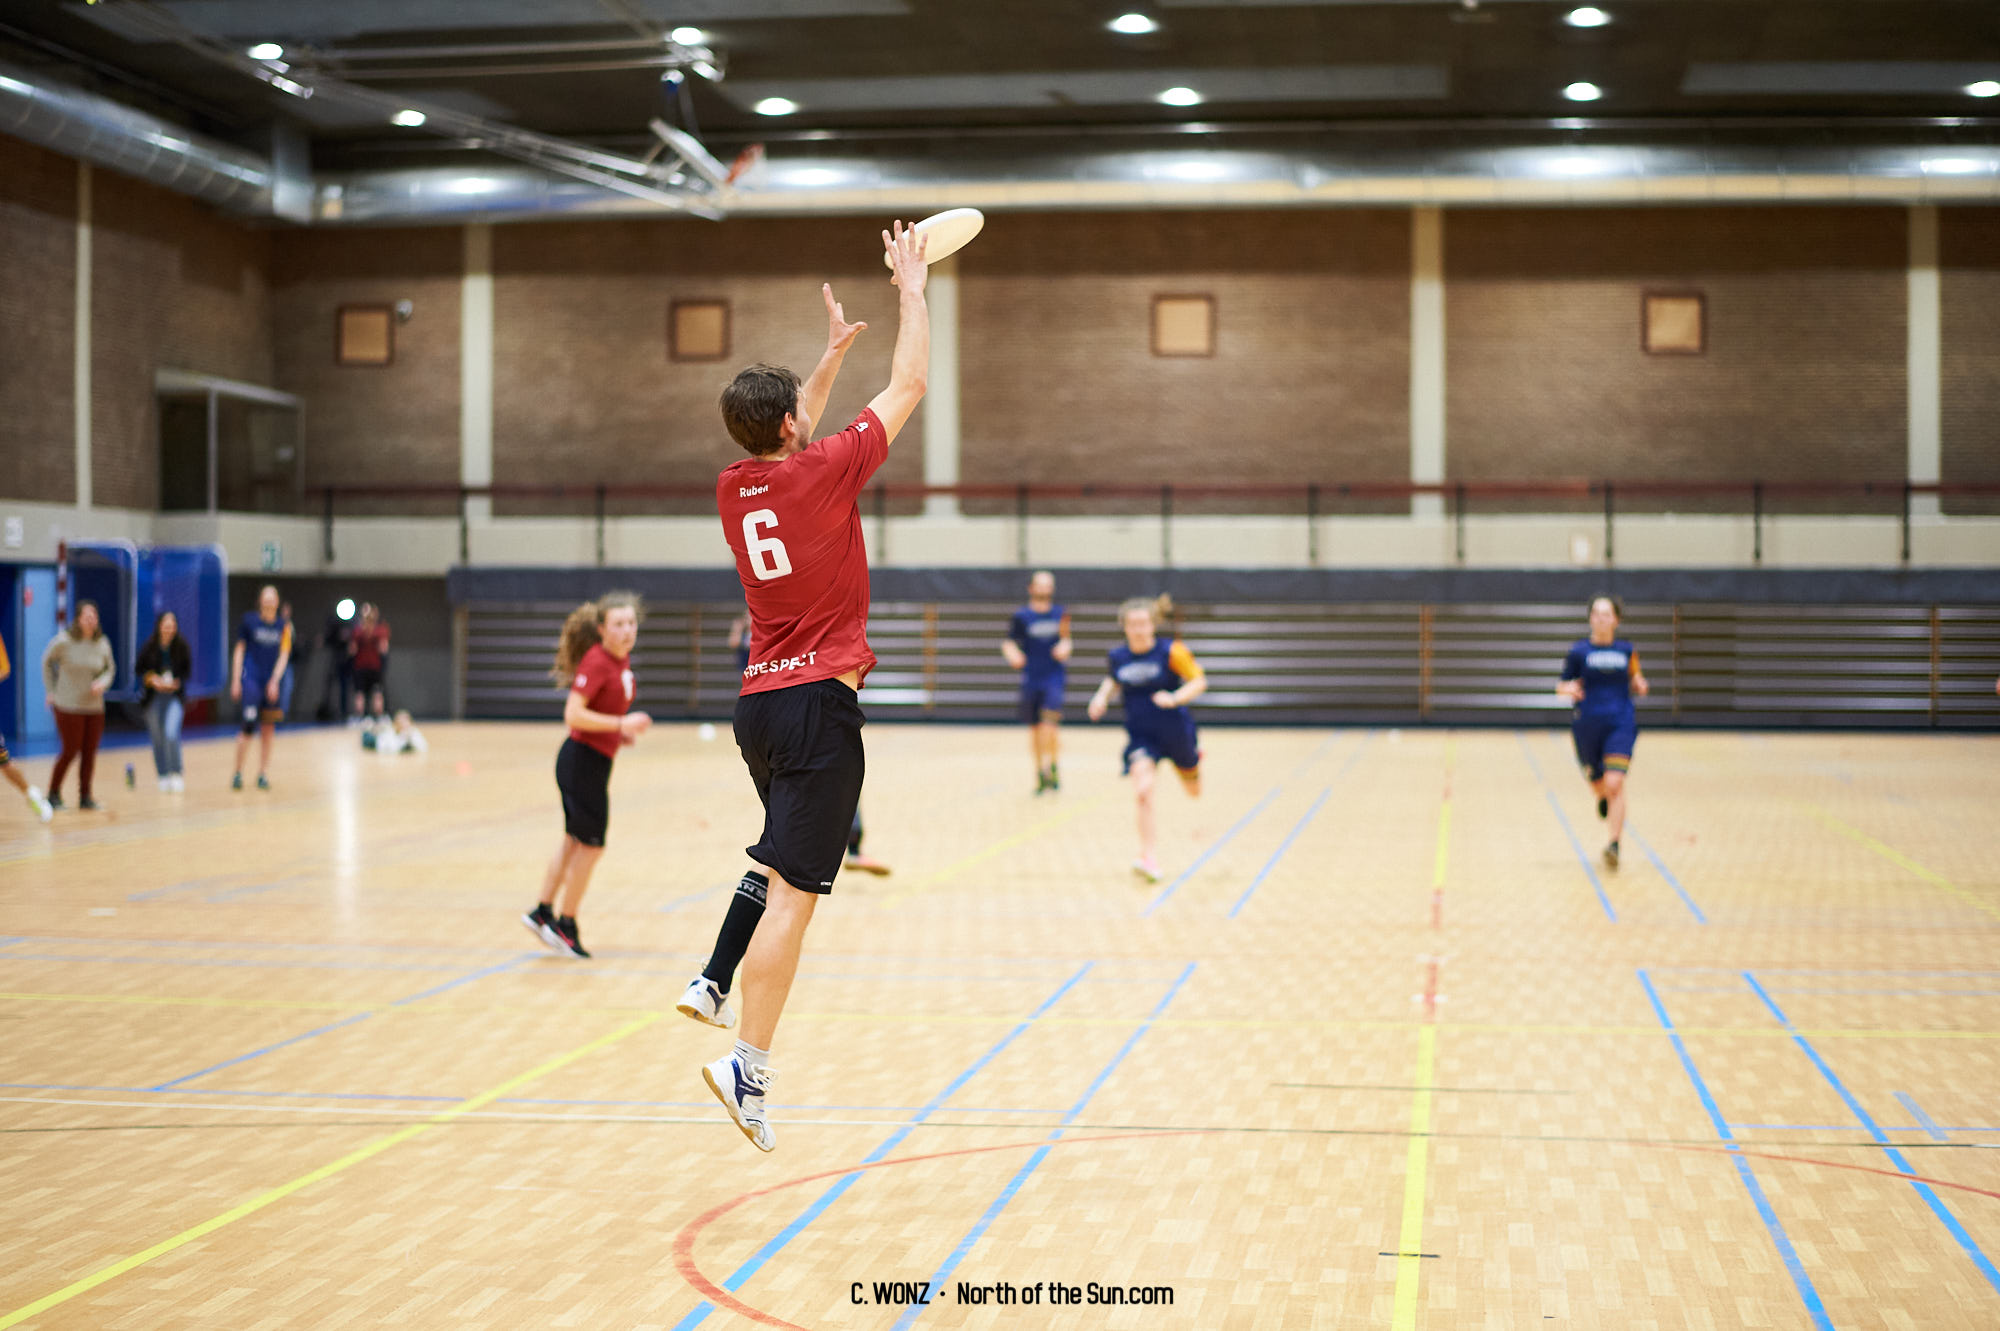 Belgian Ultimate Mixed Indoor Championships Playoffs 2020 by northofthesun.com